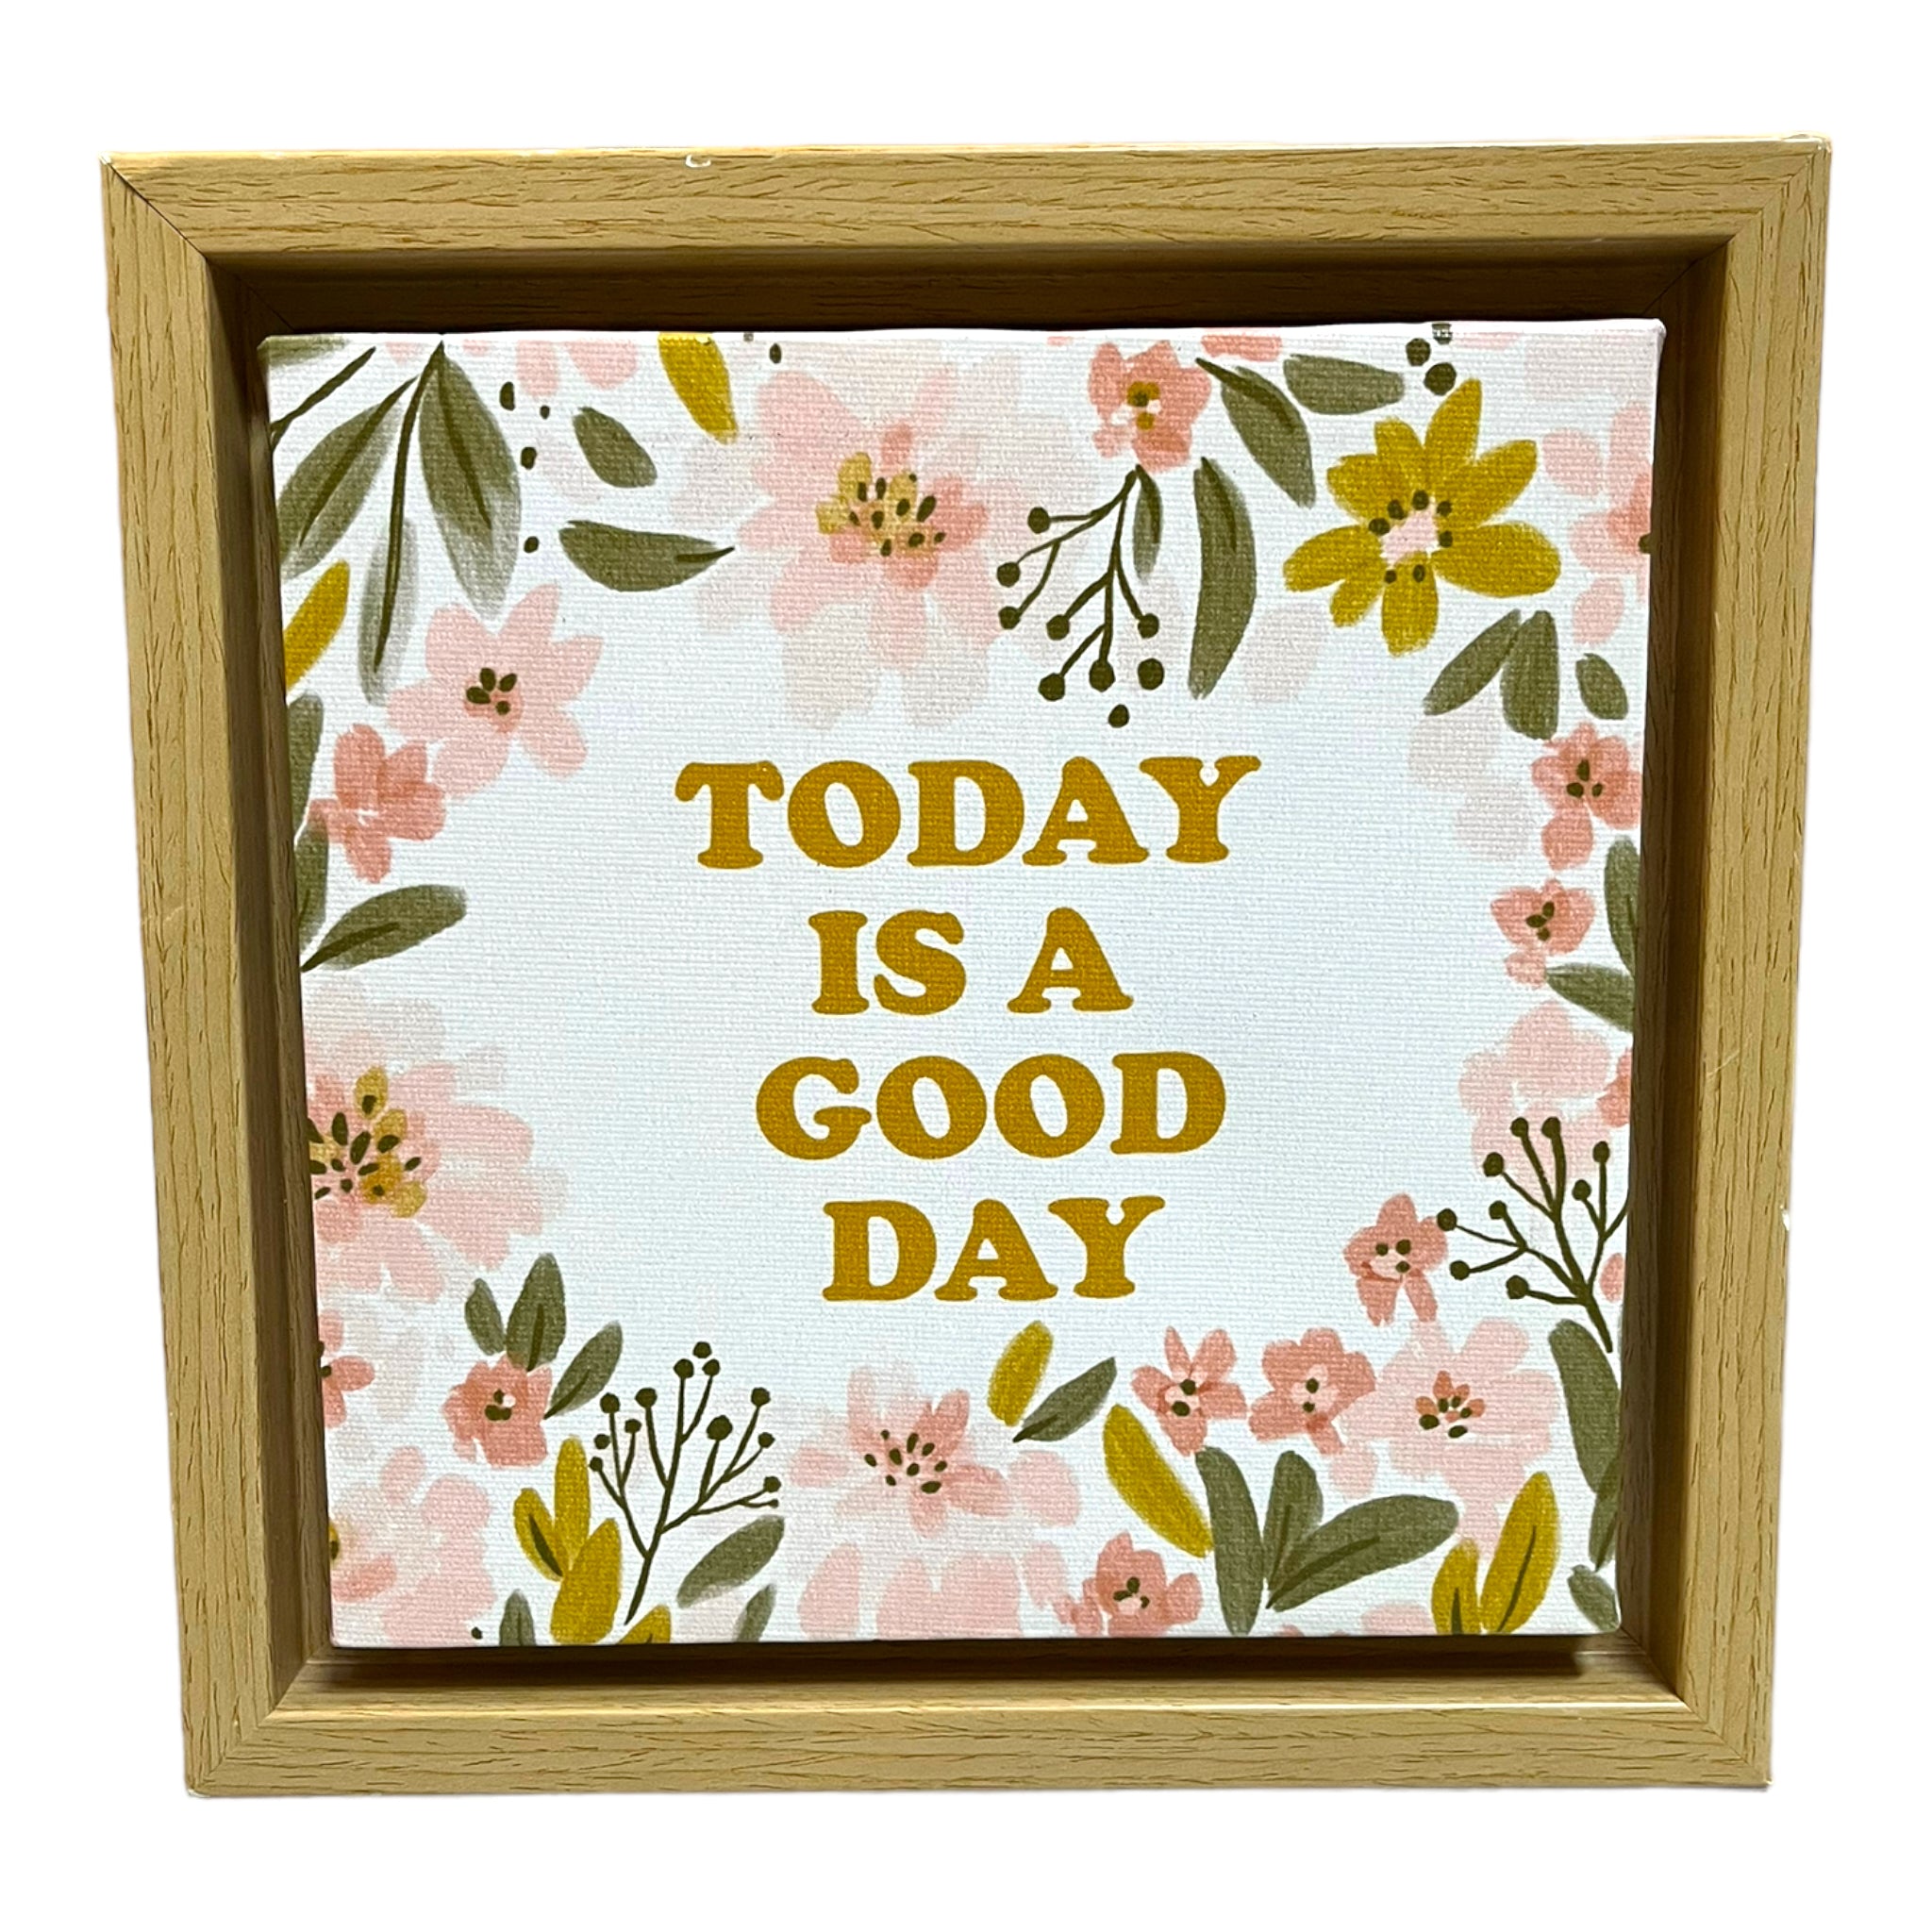 “Today Is A Good Day” Decor